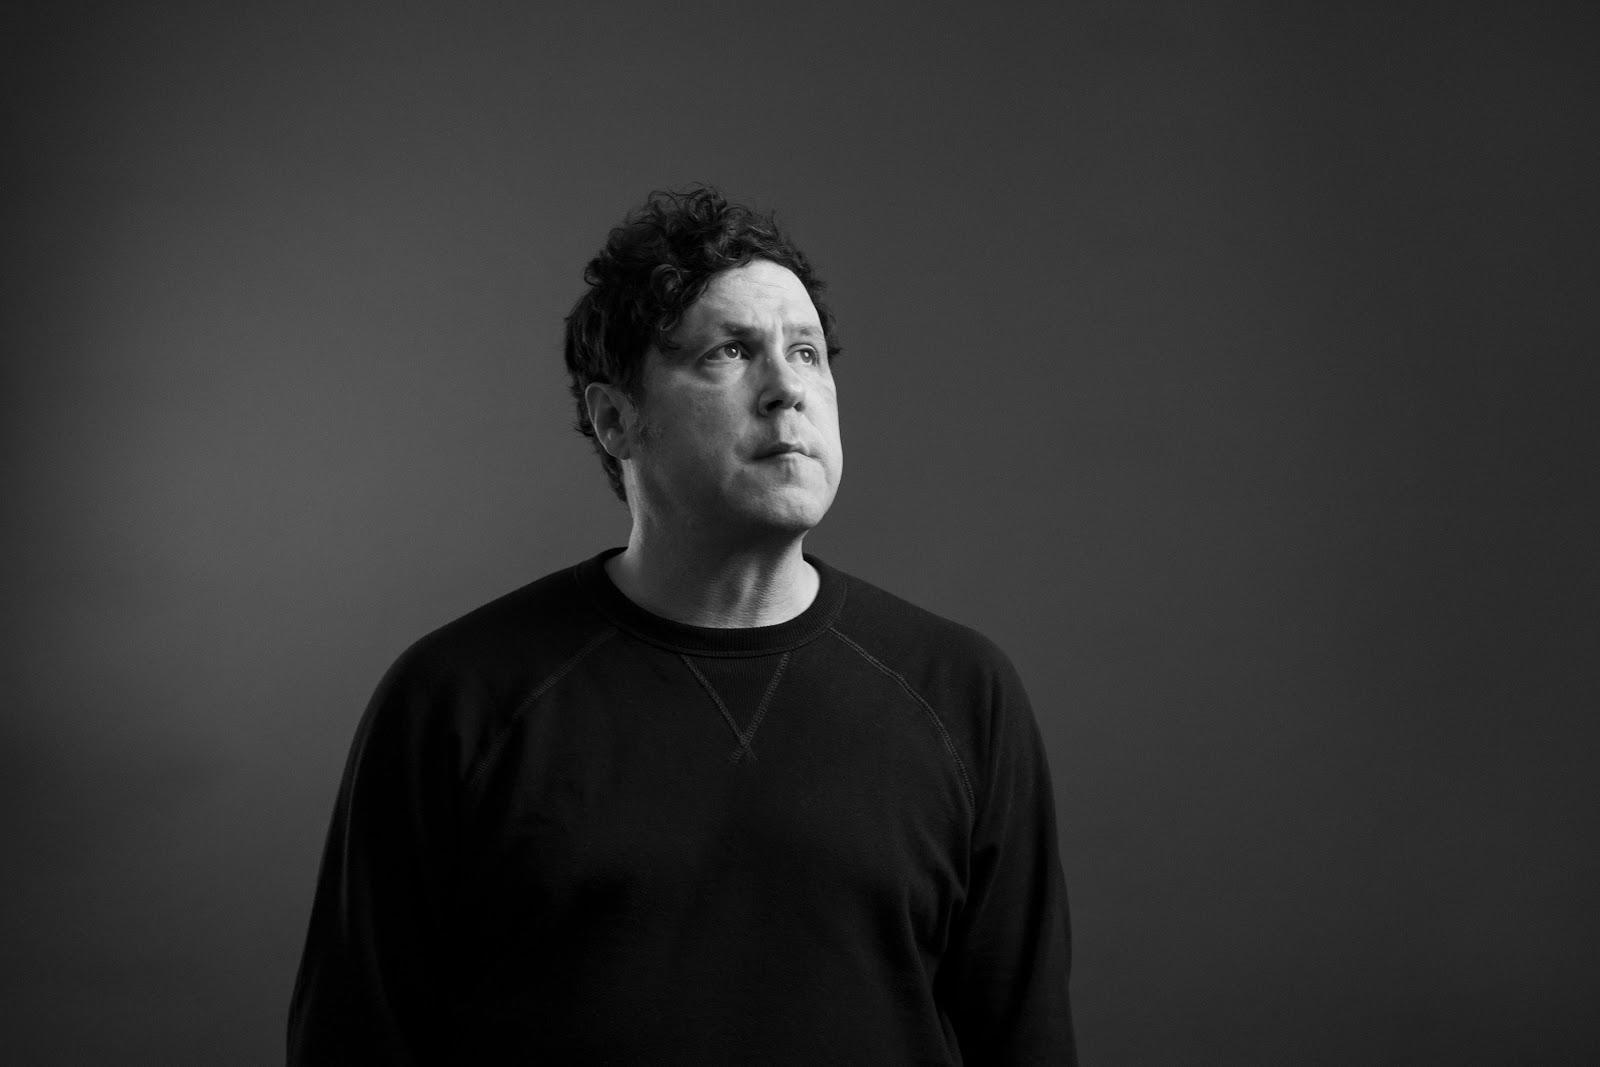 "Throw Me Now Your Arms" by Damien Jurado is Northern Transmissions 'Song of the Day.'